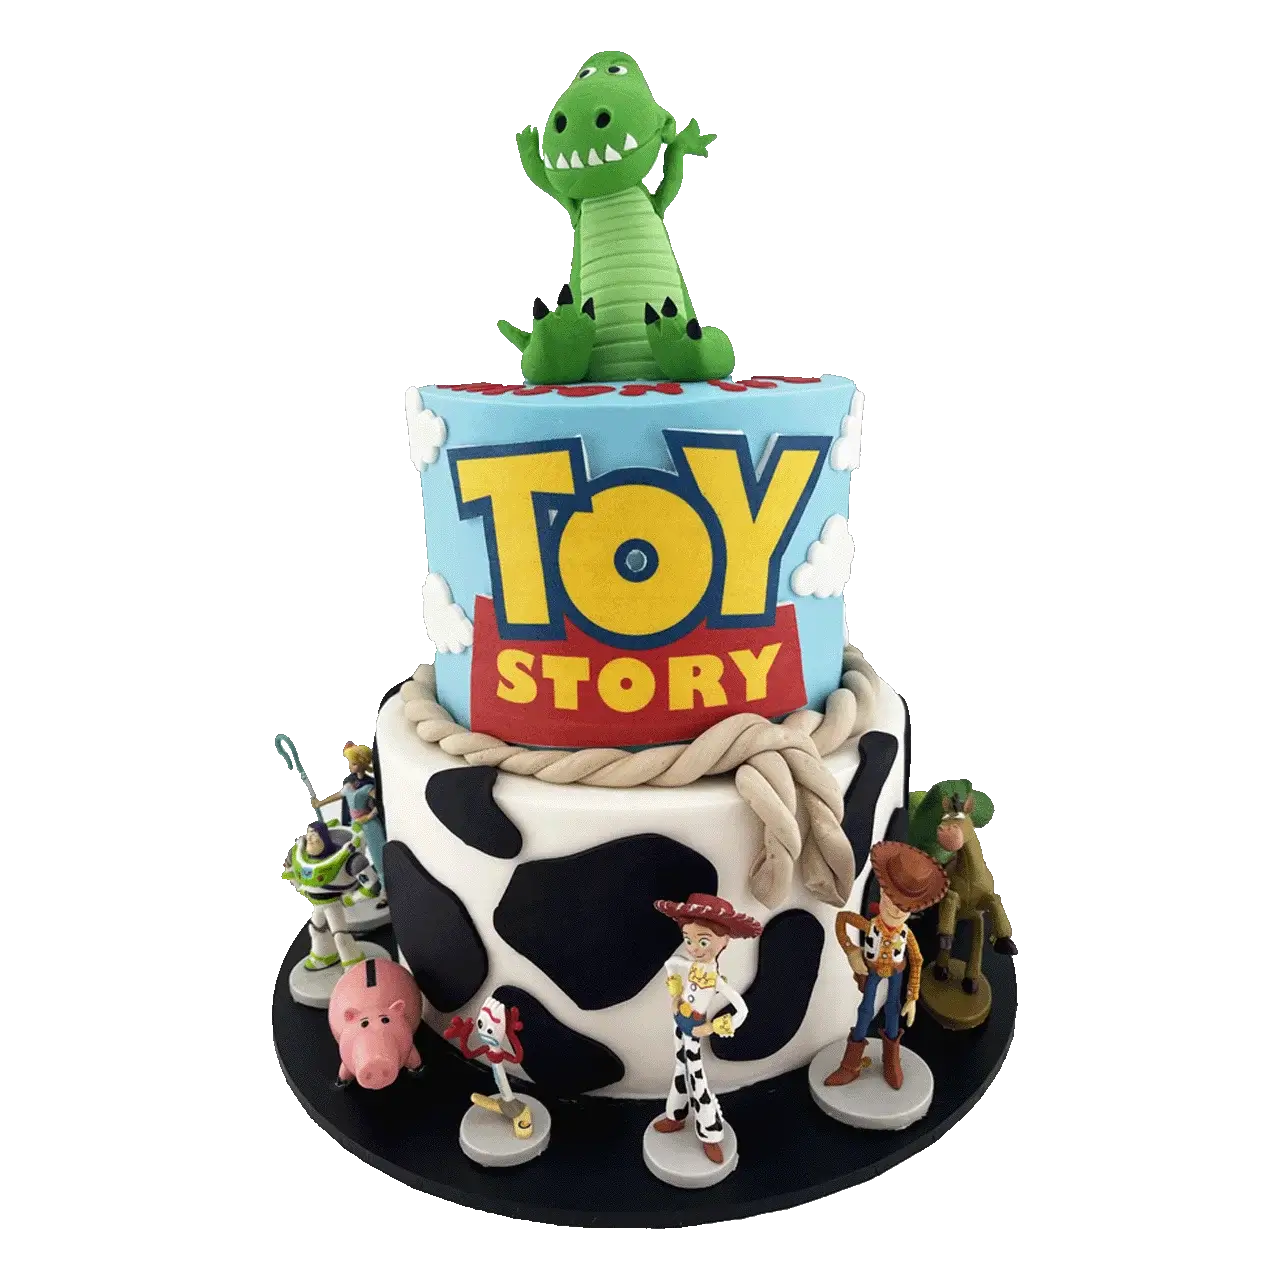 Toy Story cake - a fun and playful cake featuring beloved characters from the movie